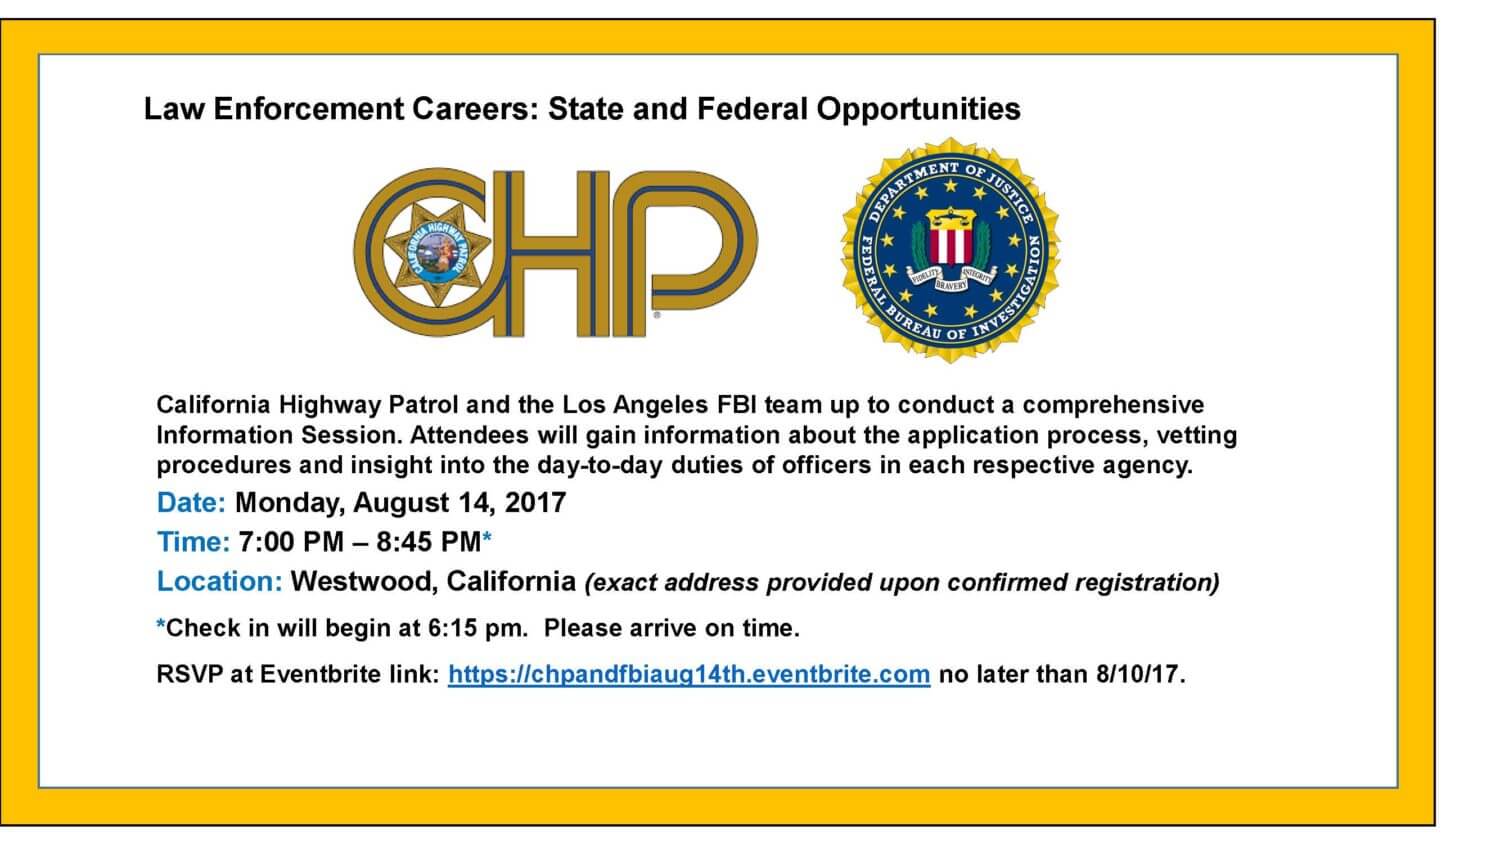 Featured image for “California Highway Patrol and the FBI team up to conduct Information Session”